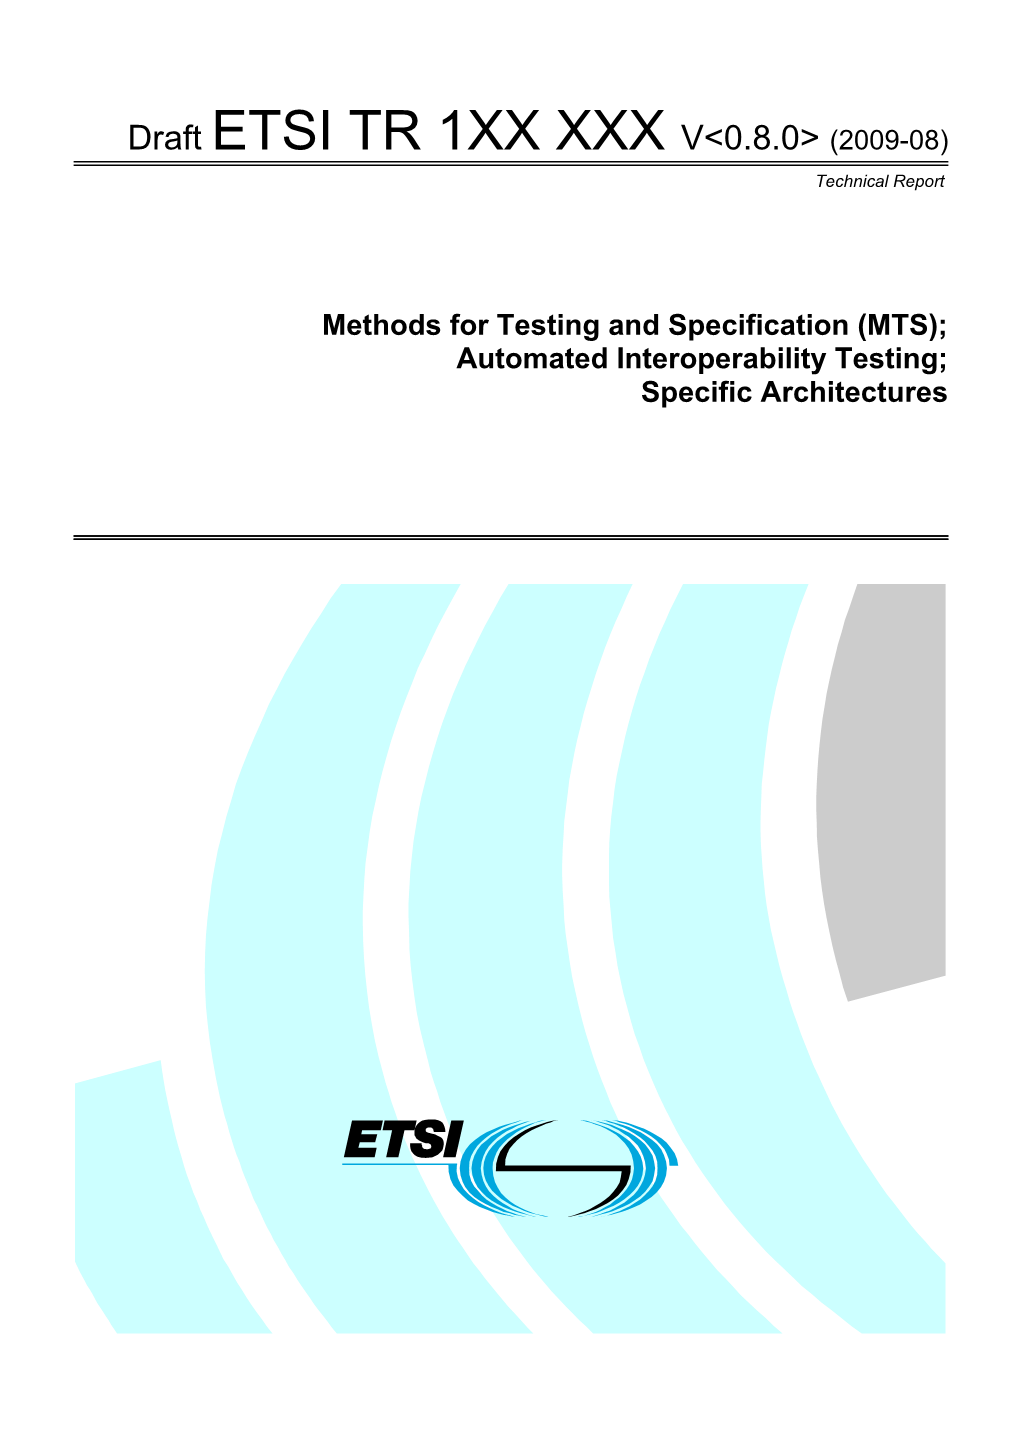 Methods for Testing and Specification (MTS); s1